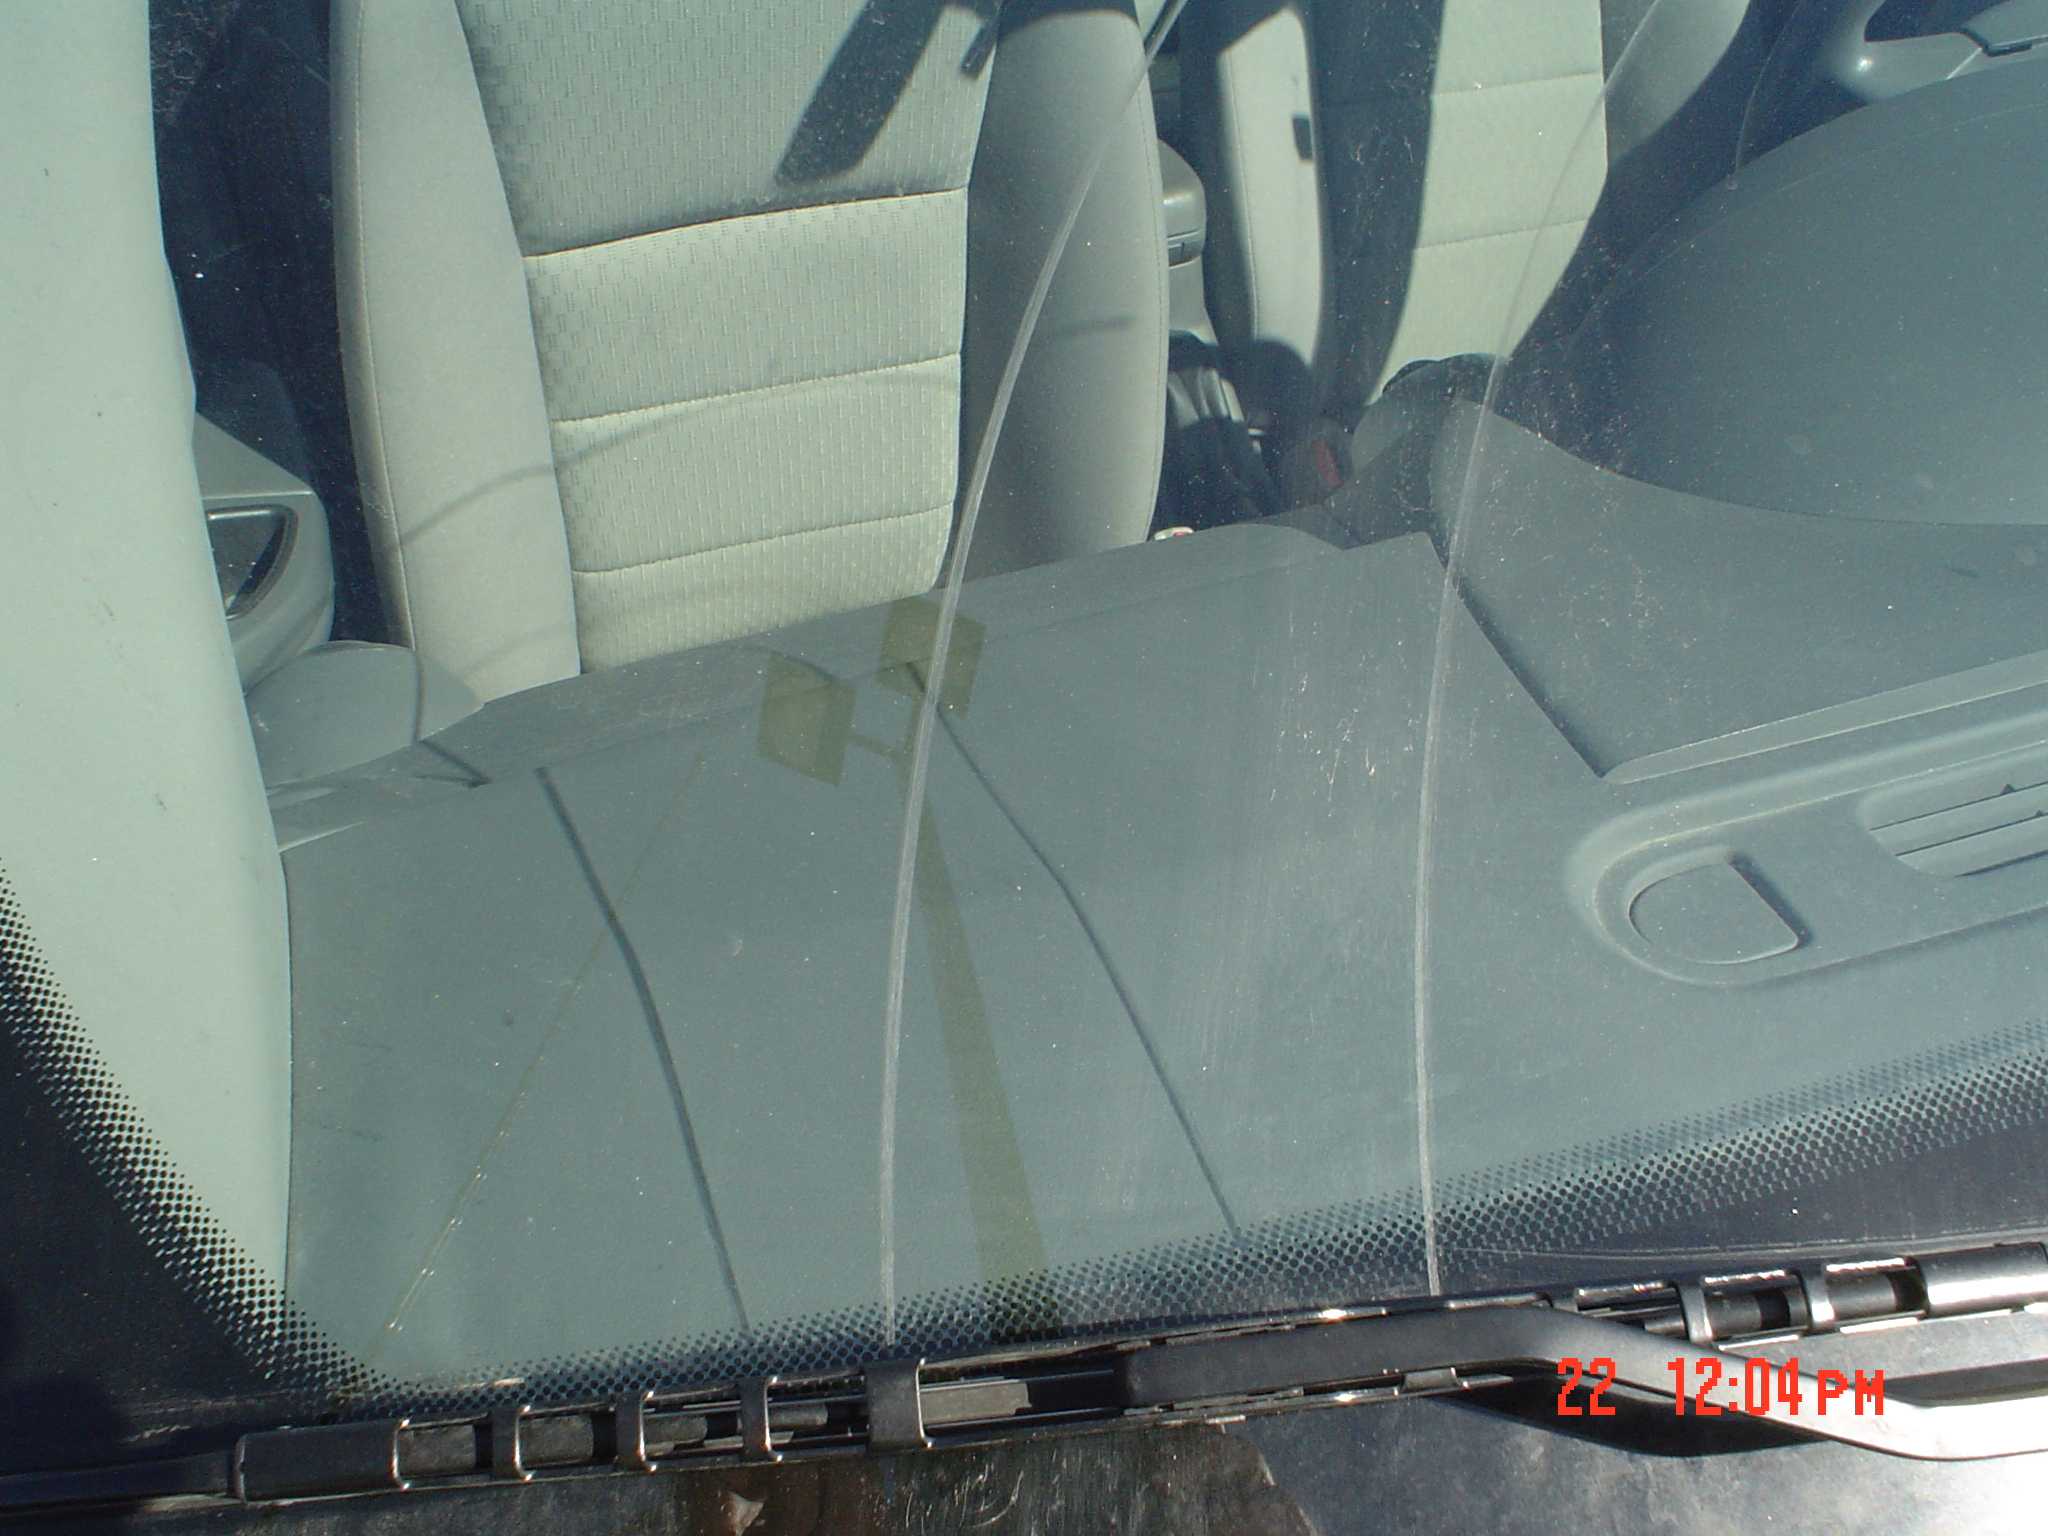 How do you repair windshield scratches?